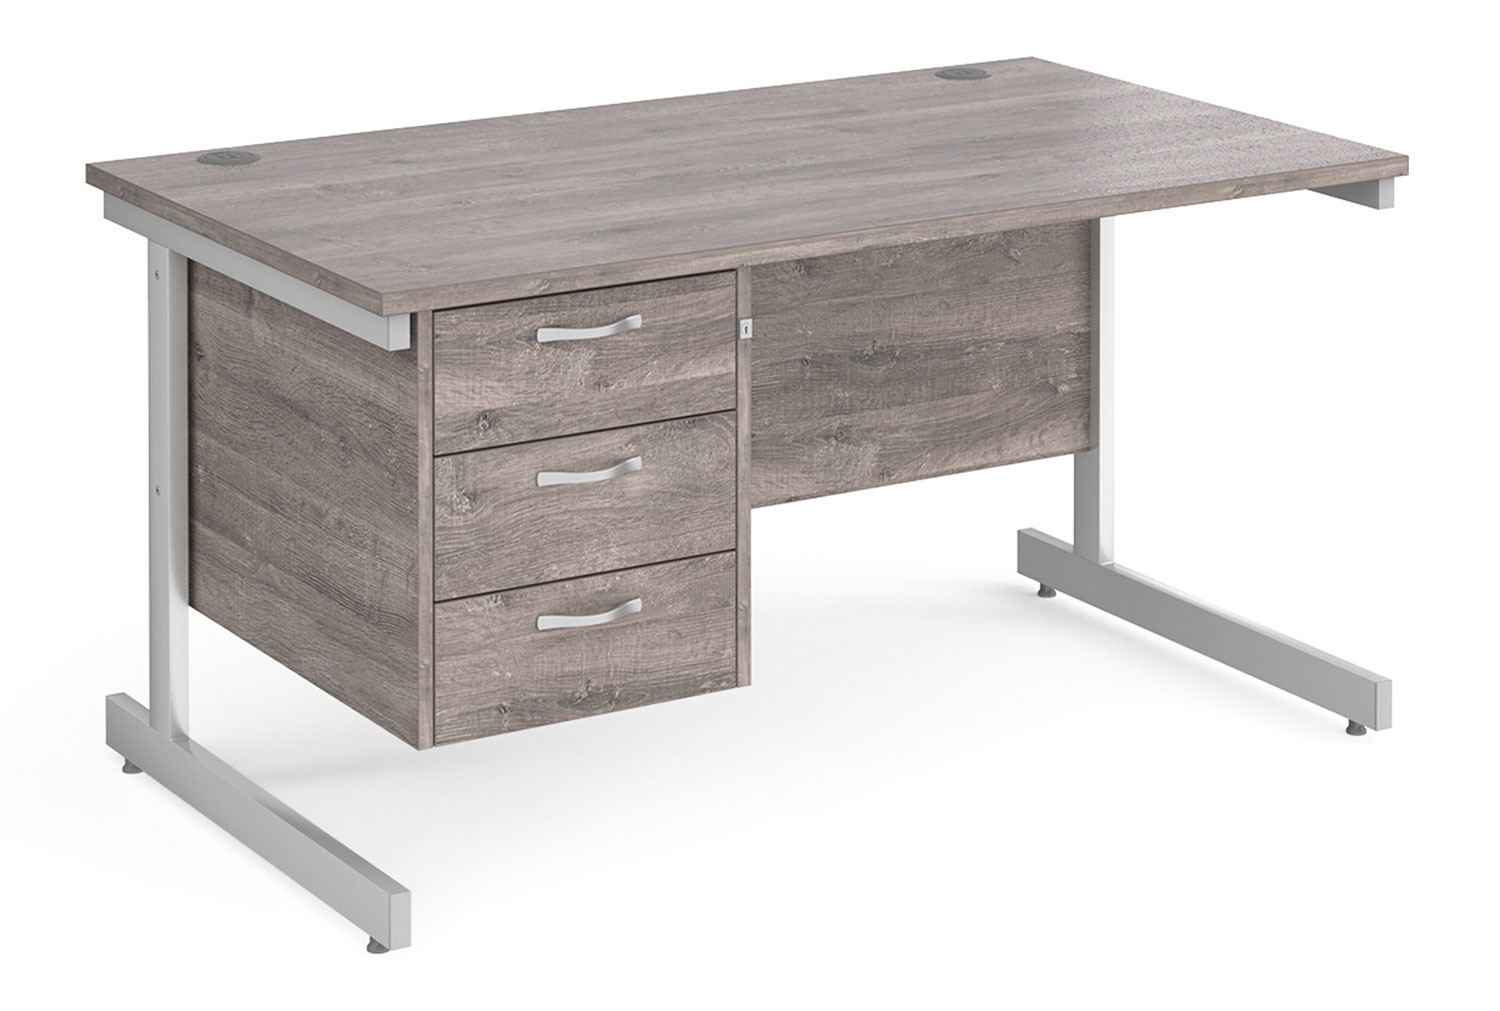 All Grey Oak C-Leg Clerical Office Desk 3 Drawer, 140wx80dx73h (cm), Express Delivery